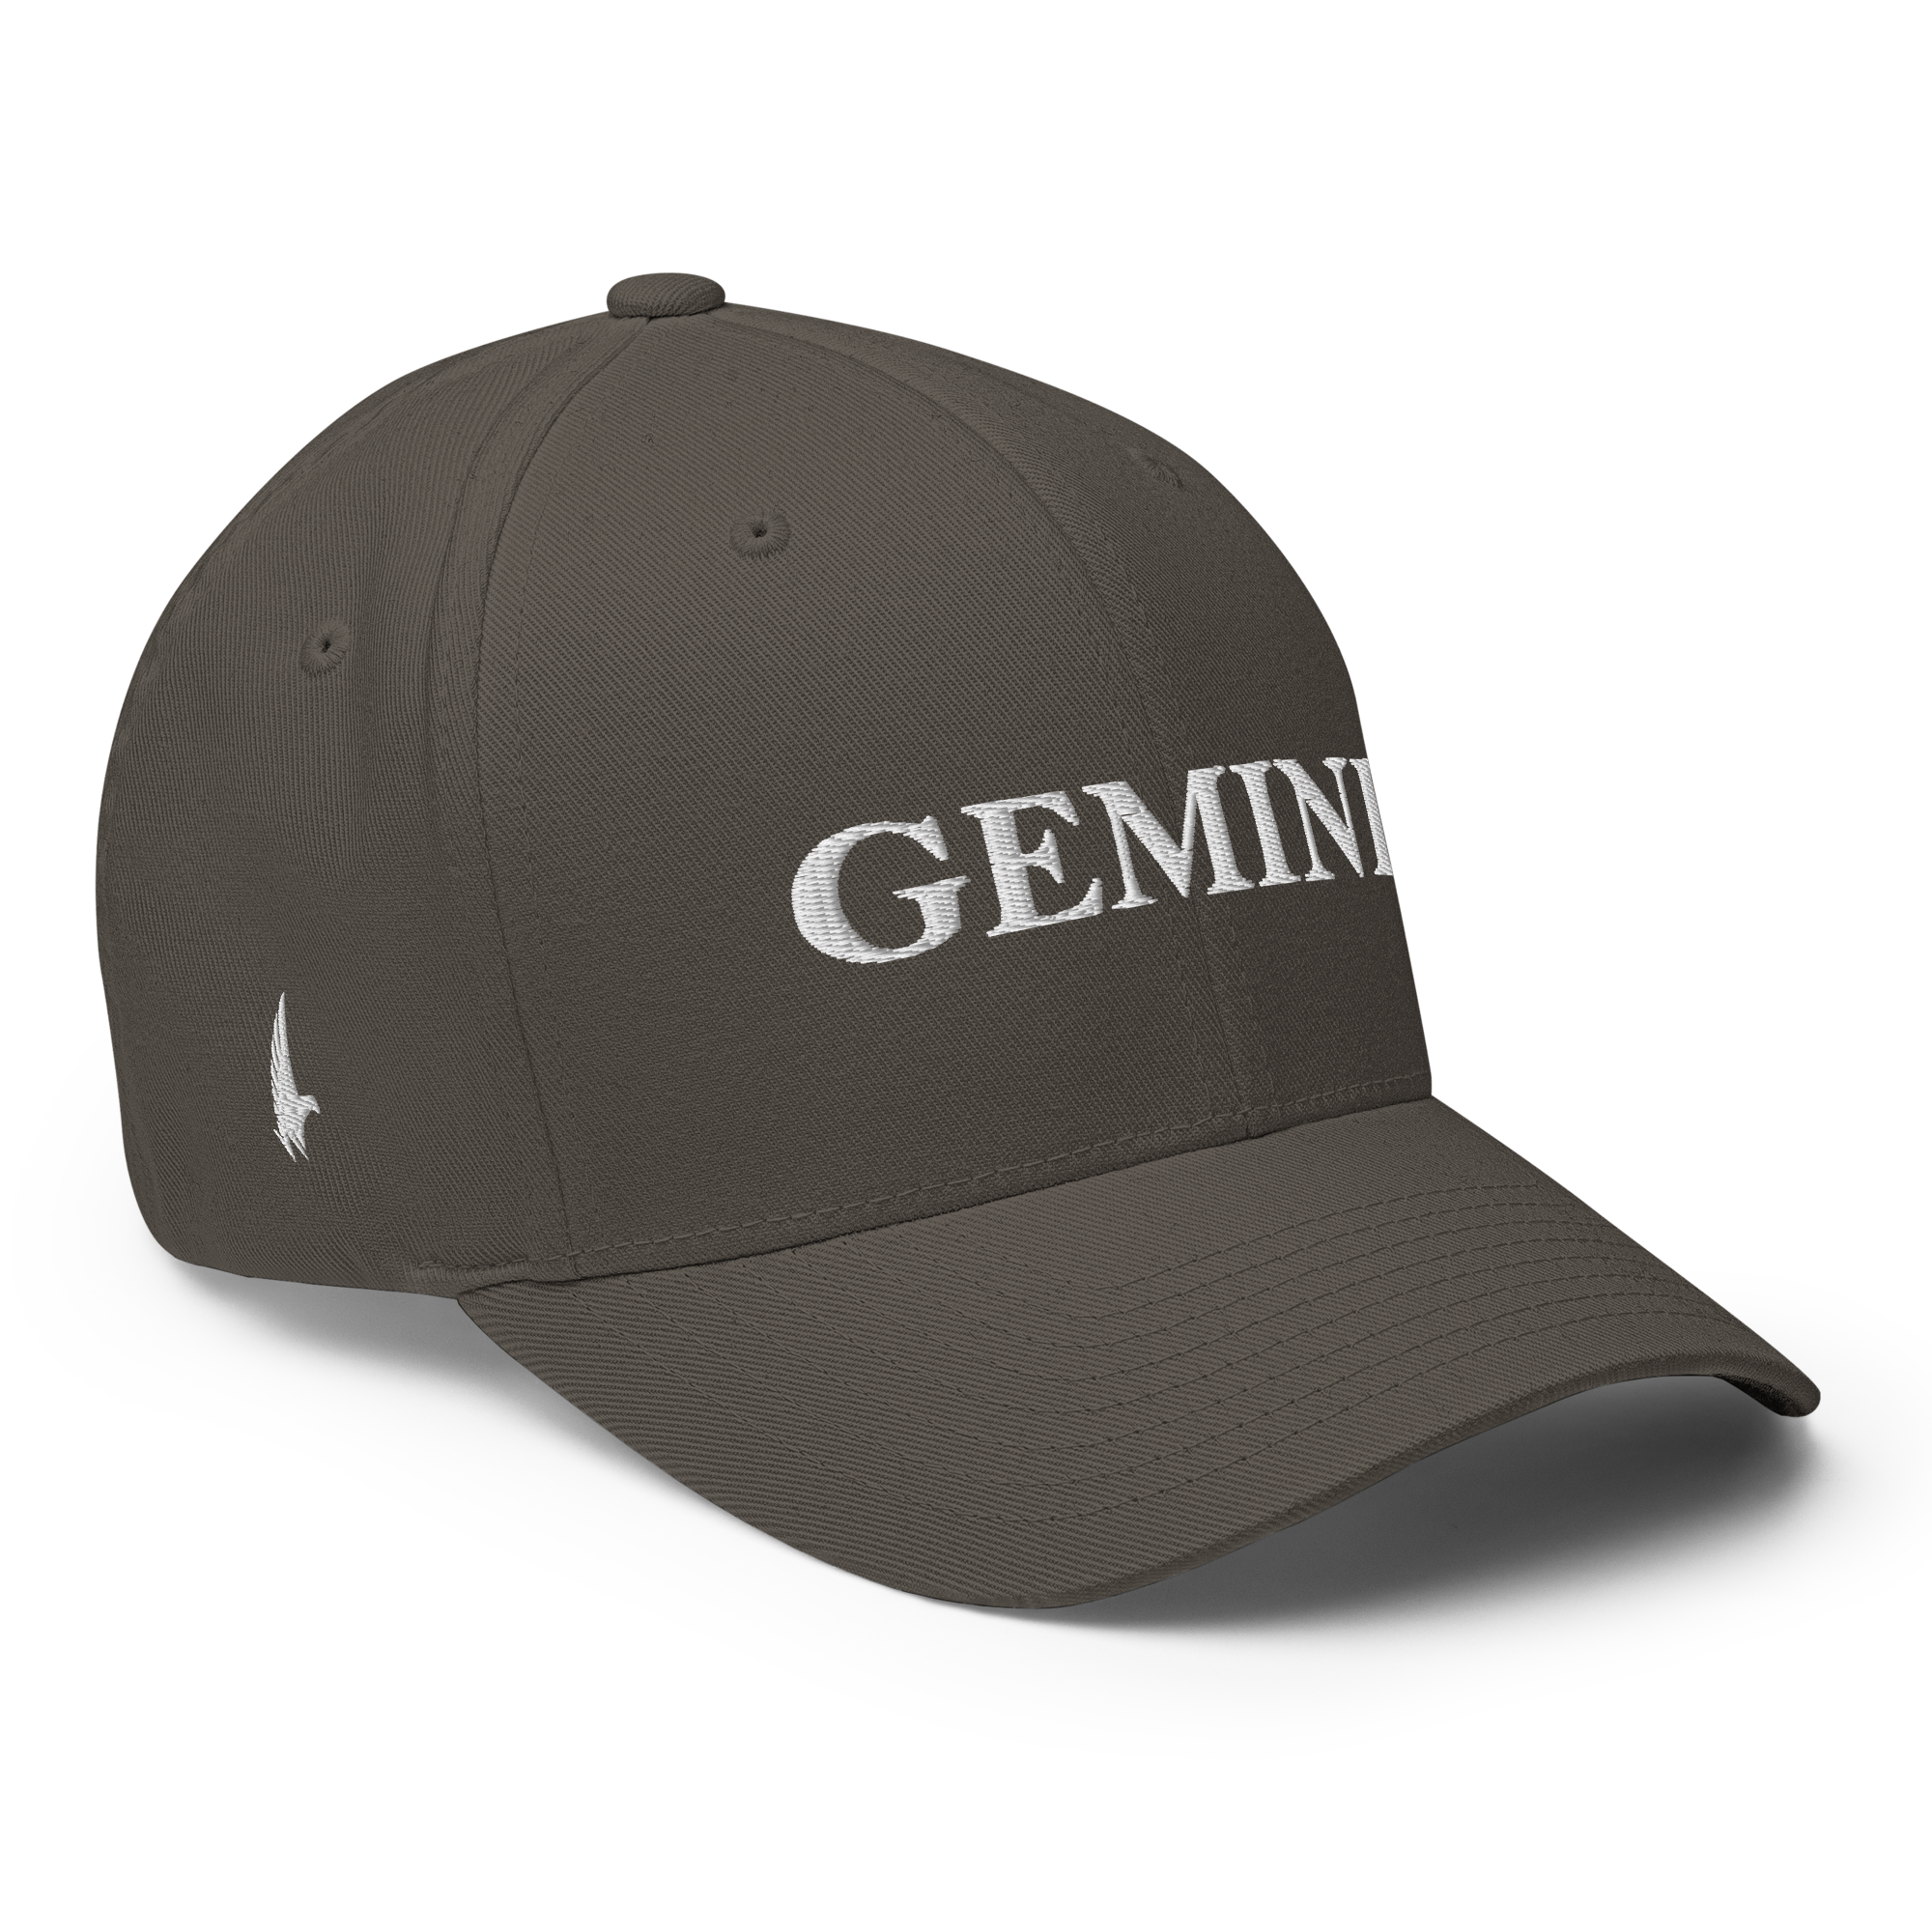 Original Gemini Fitted Hat Charcoal Grey Fitted - Loyalty Vibes